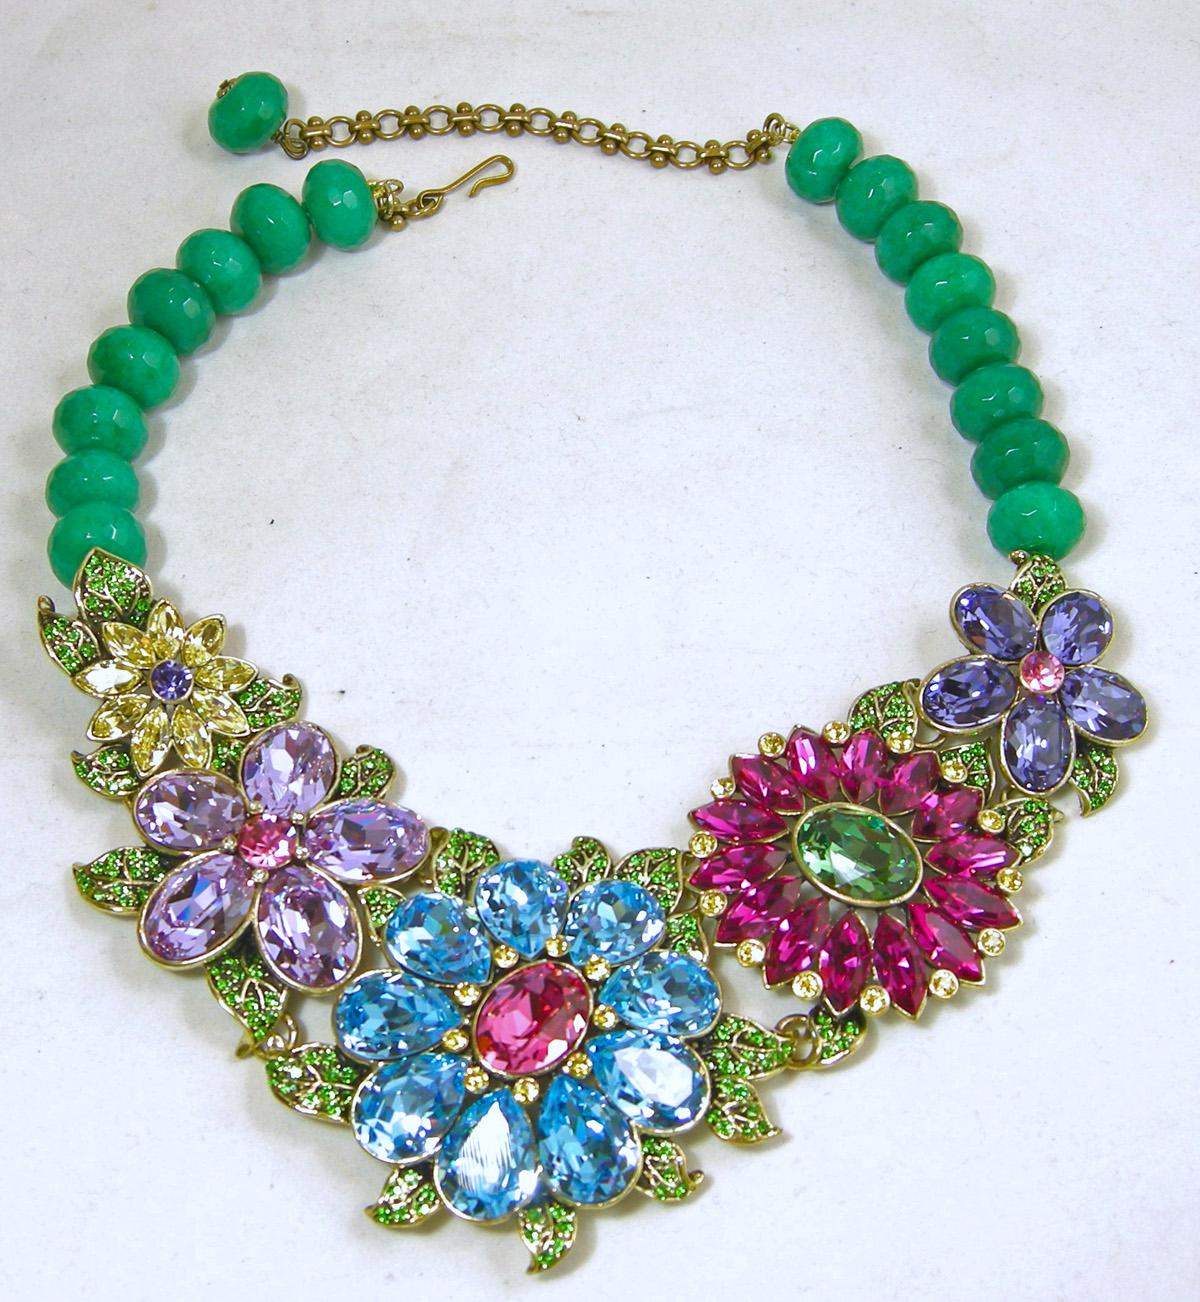 This Heidi Daus necklace has green glass beads with a hook clasp leading downward to a magnificent array of beautiful 3-dimensional flowers that graduate in size.  The flowers are decorated with vibrant crystals of citrine, light amethyst,